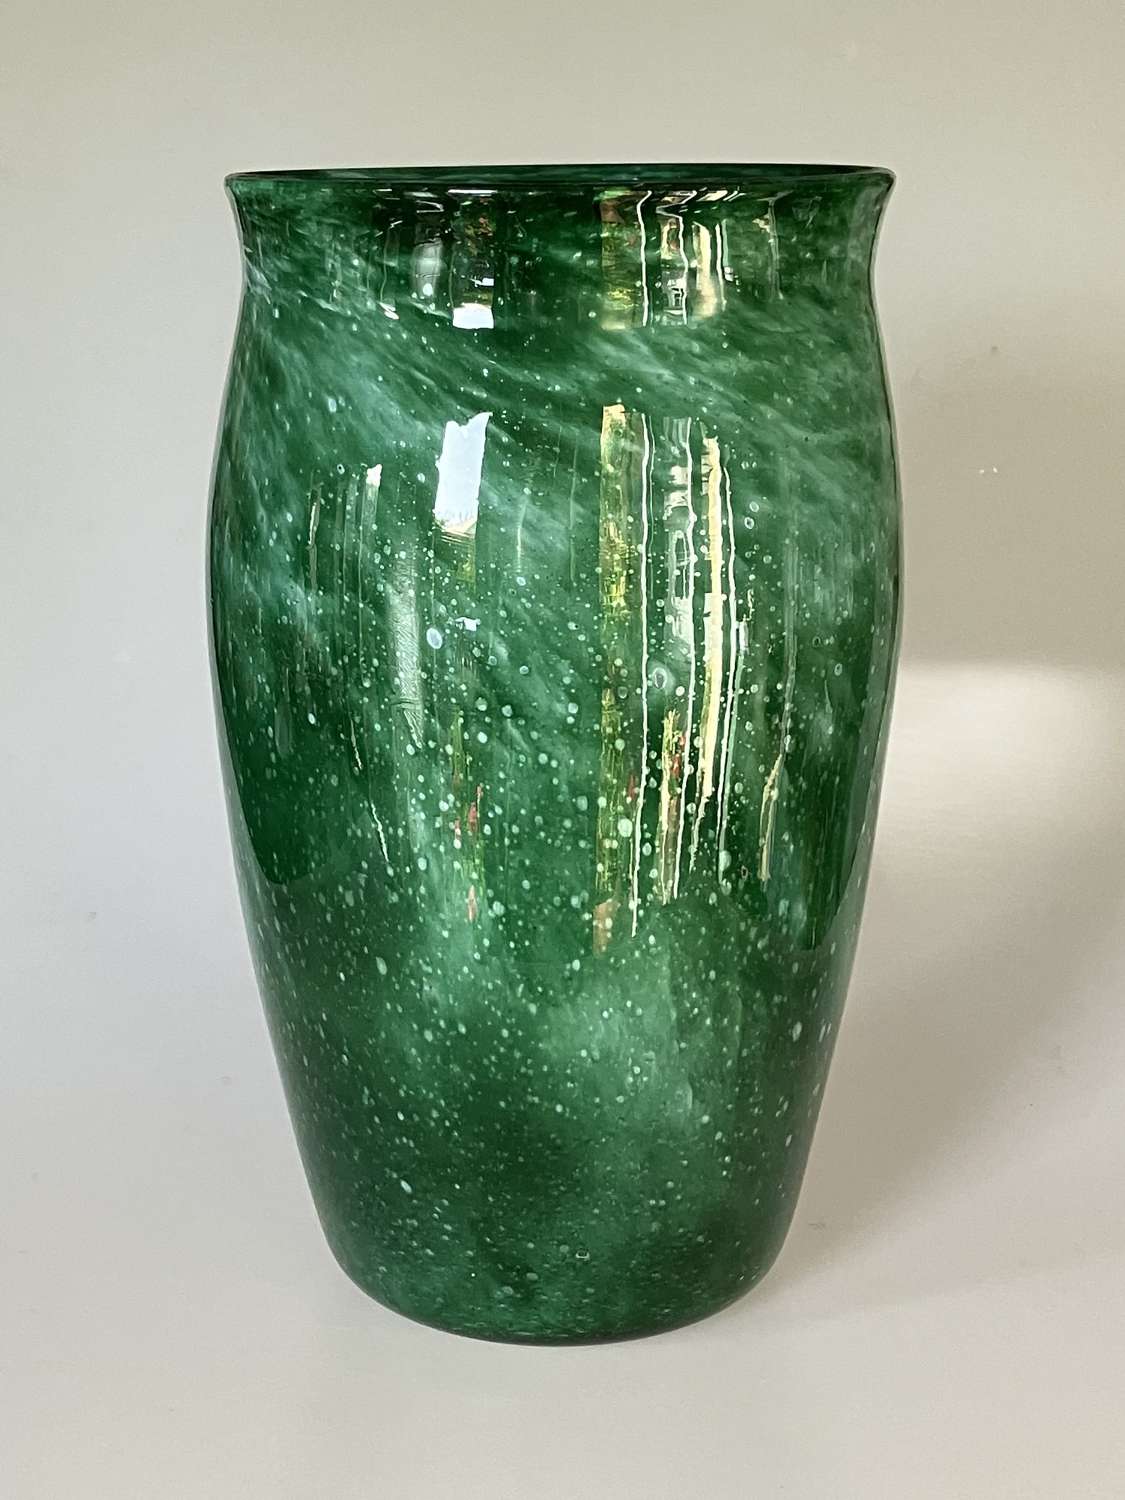 Very large cloudy green vase with flared top. Whitefriars